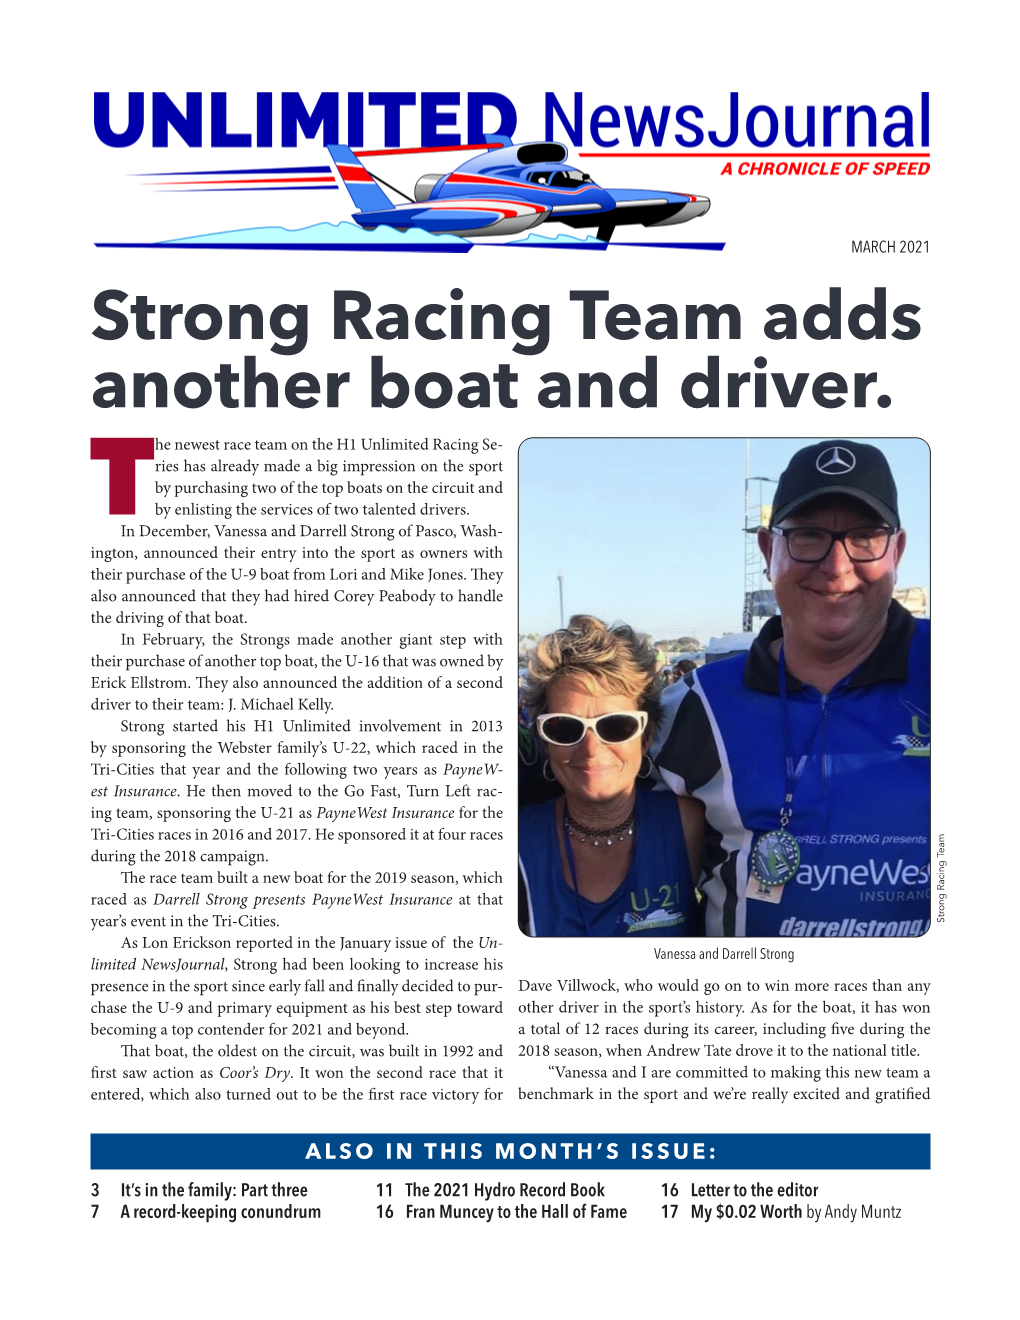 Strong Racing Team Adds Another Boat and Driver